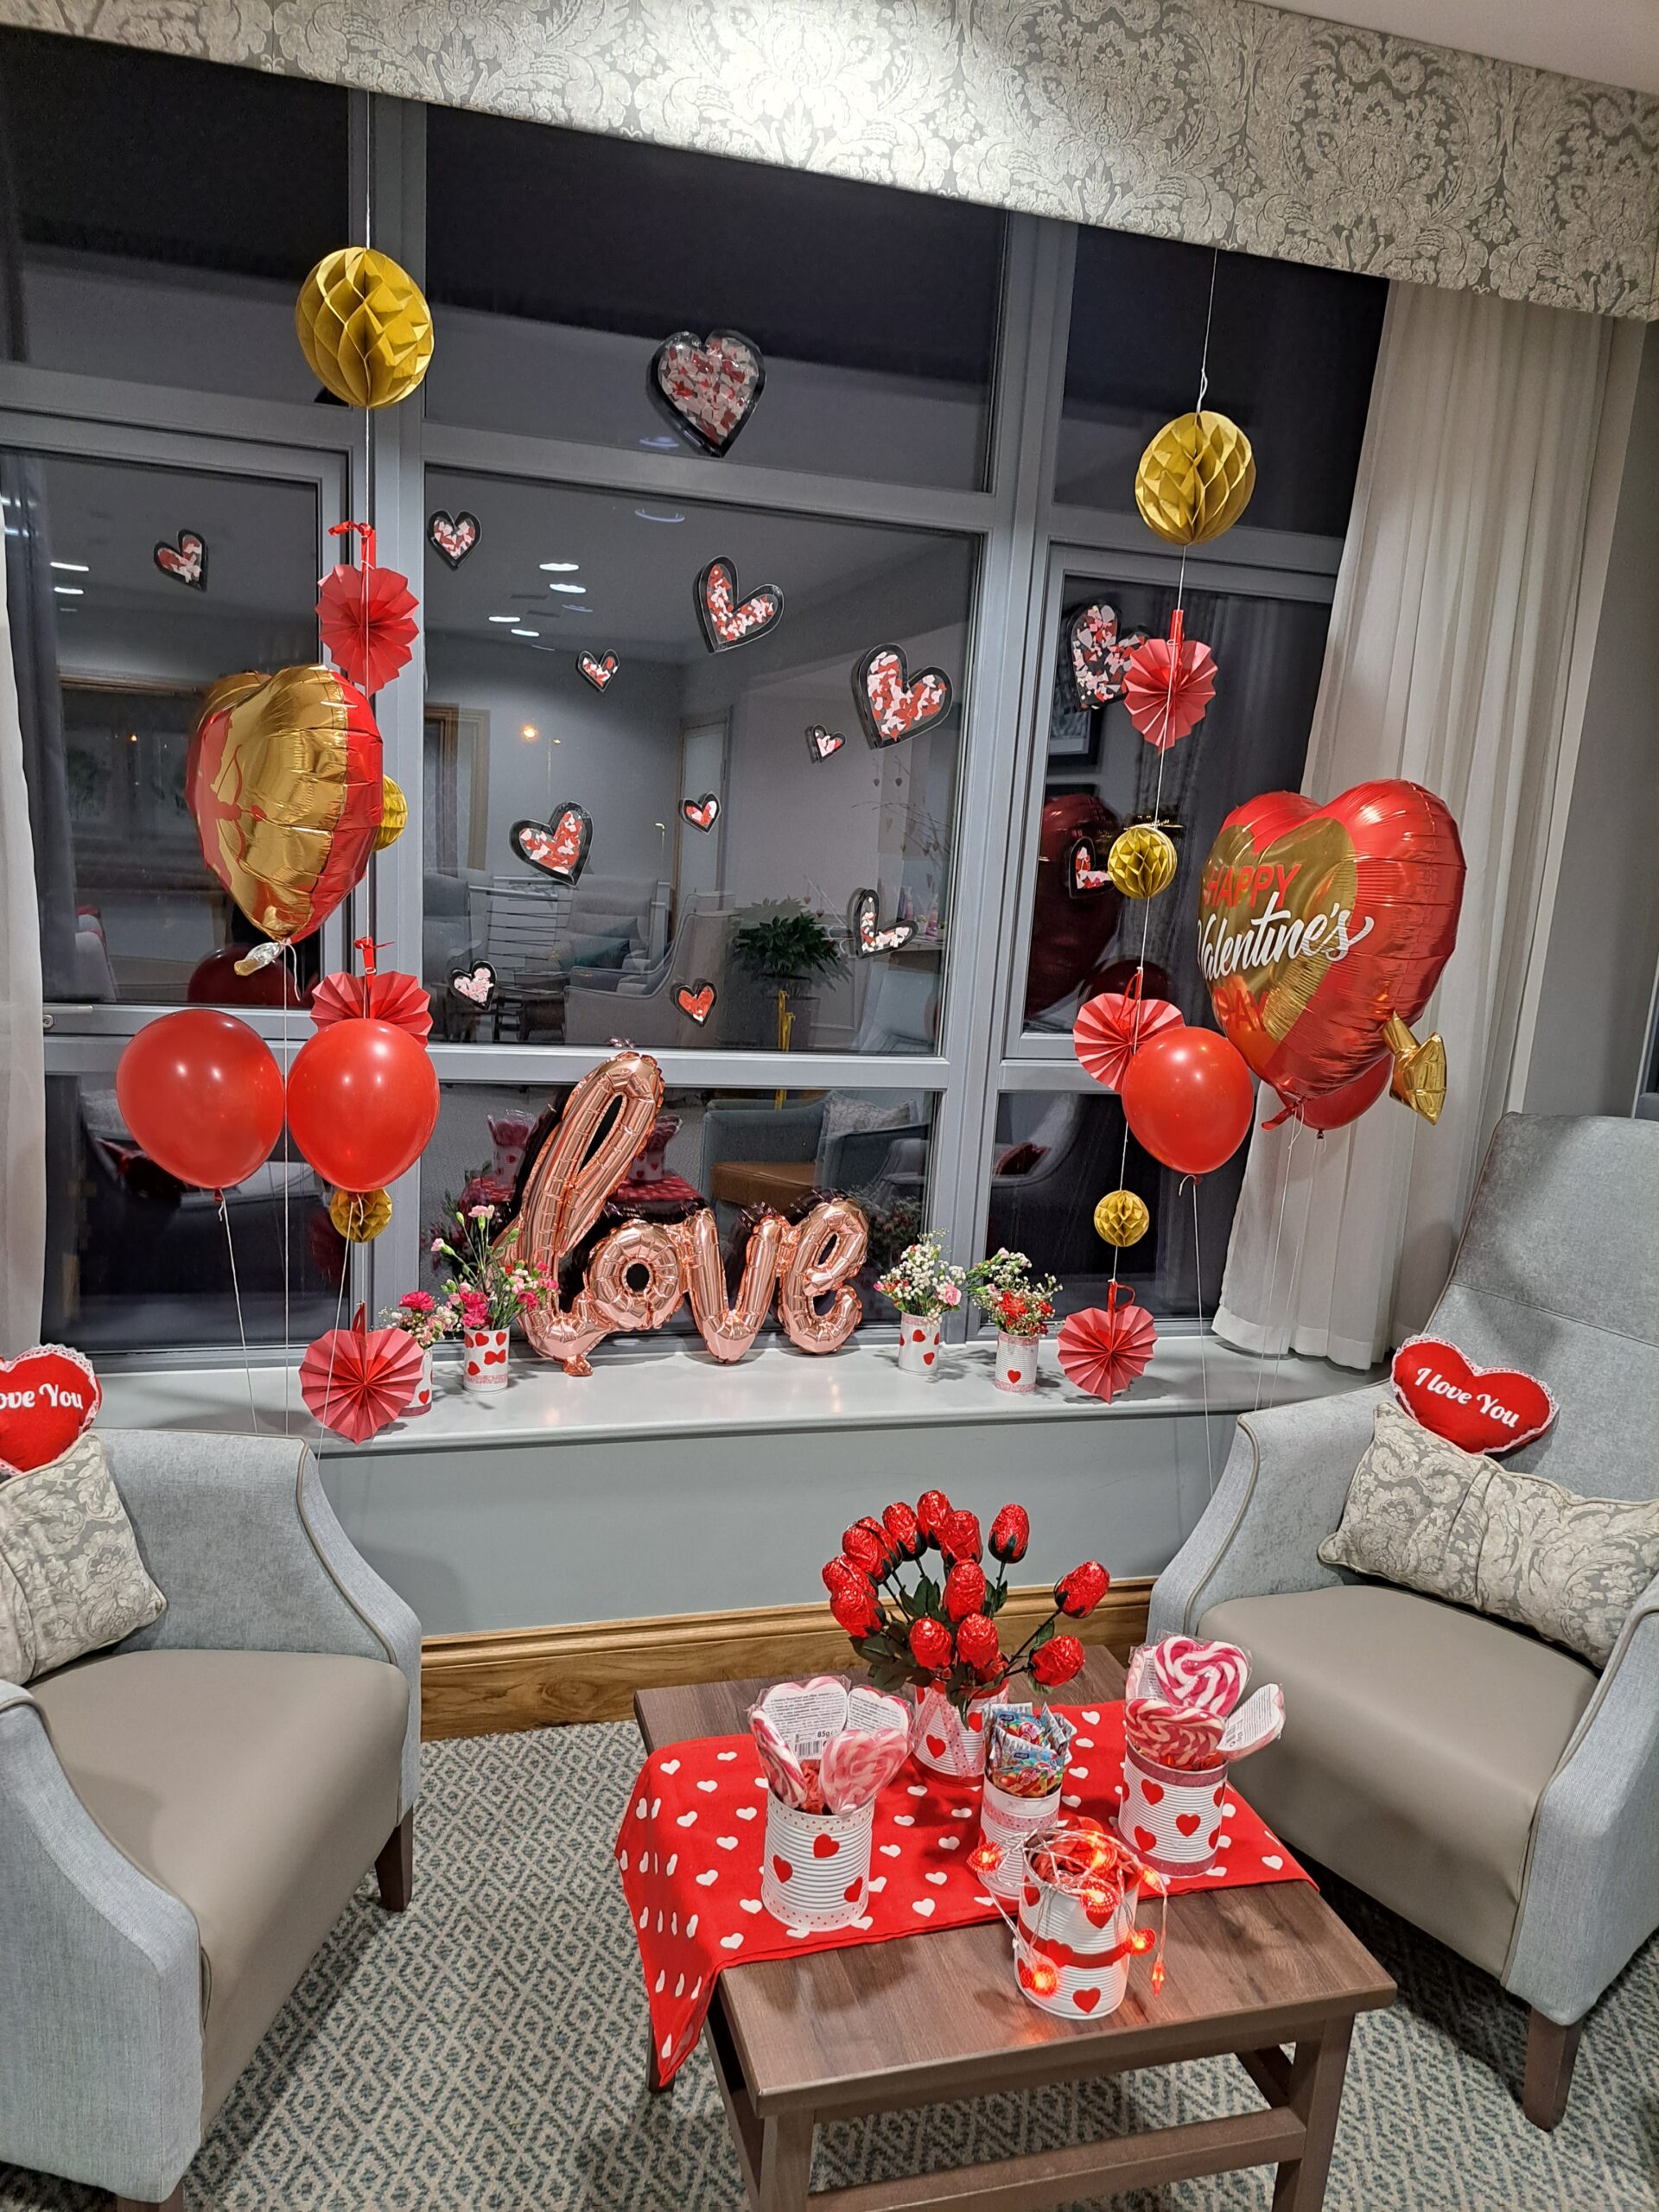 Valentines day display with balloons and chocolate flowers.